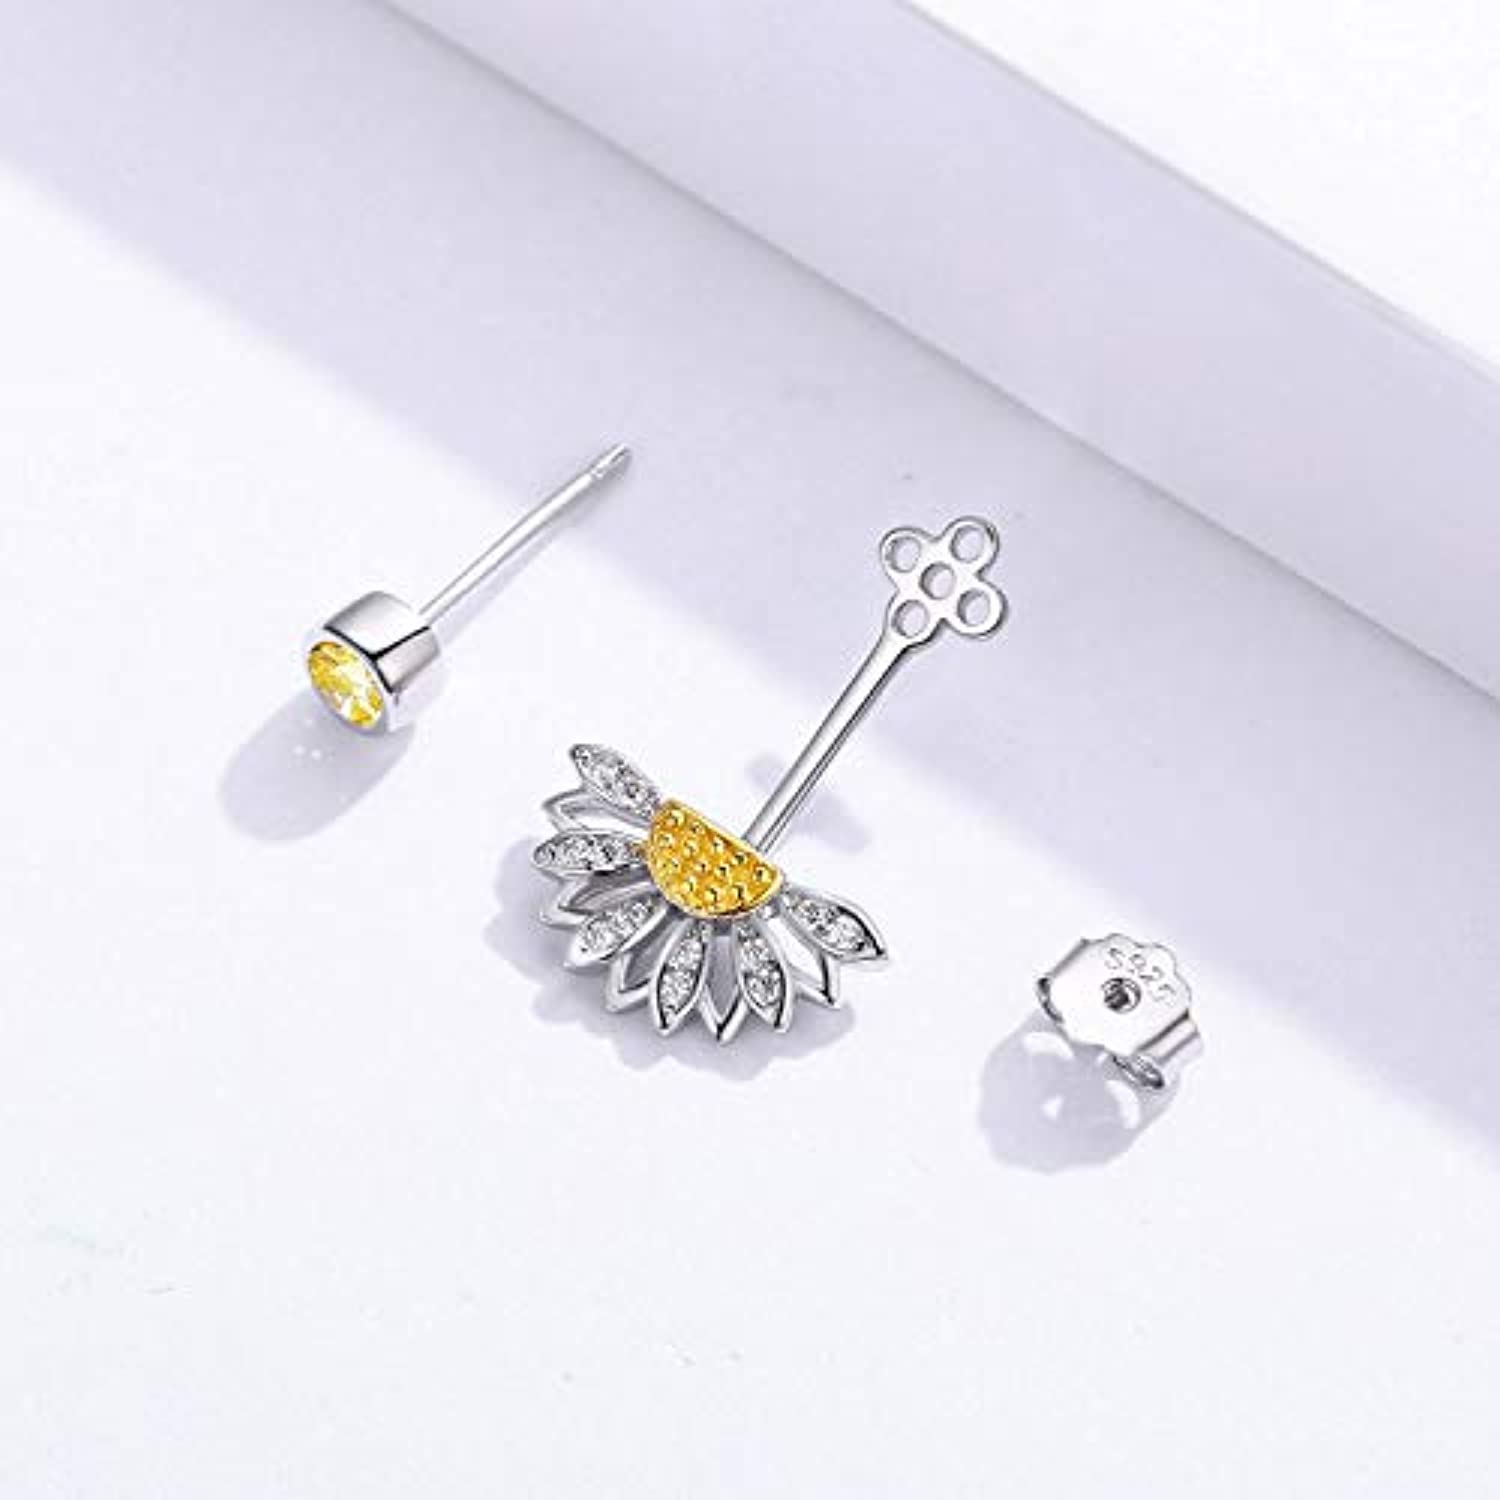 S925  Sterling silver Sunflower Stud  Earring Jewelry Gift for Her Women